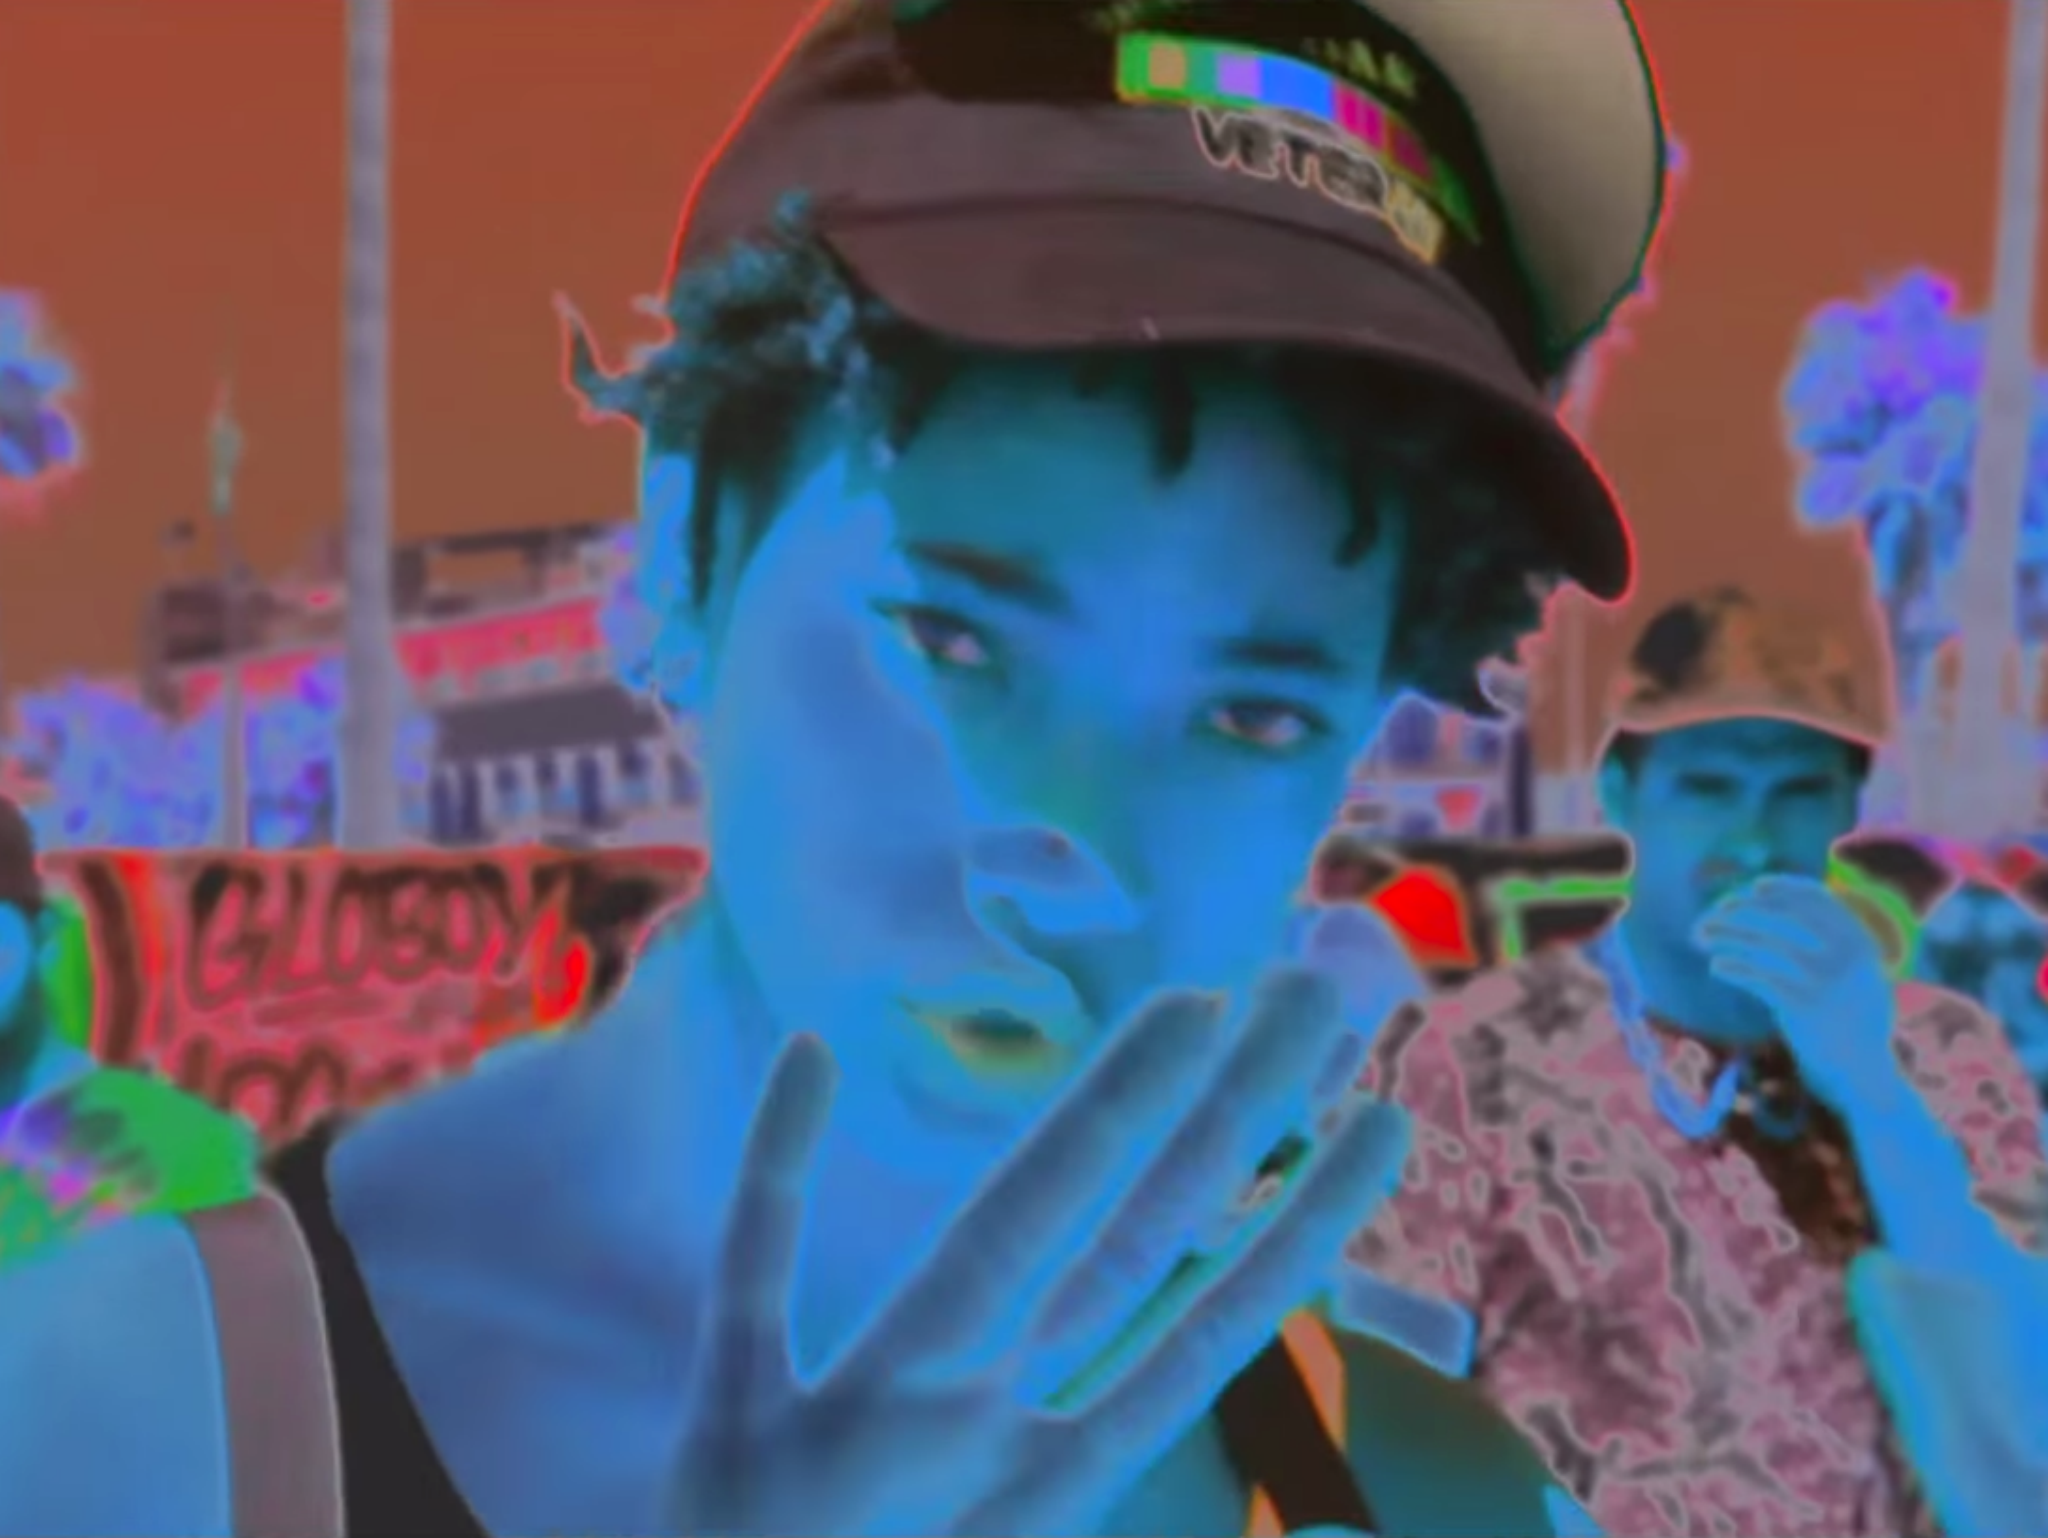 Willow Smith in her new music video 'Wit A Indigo'